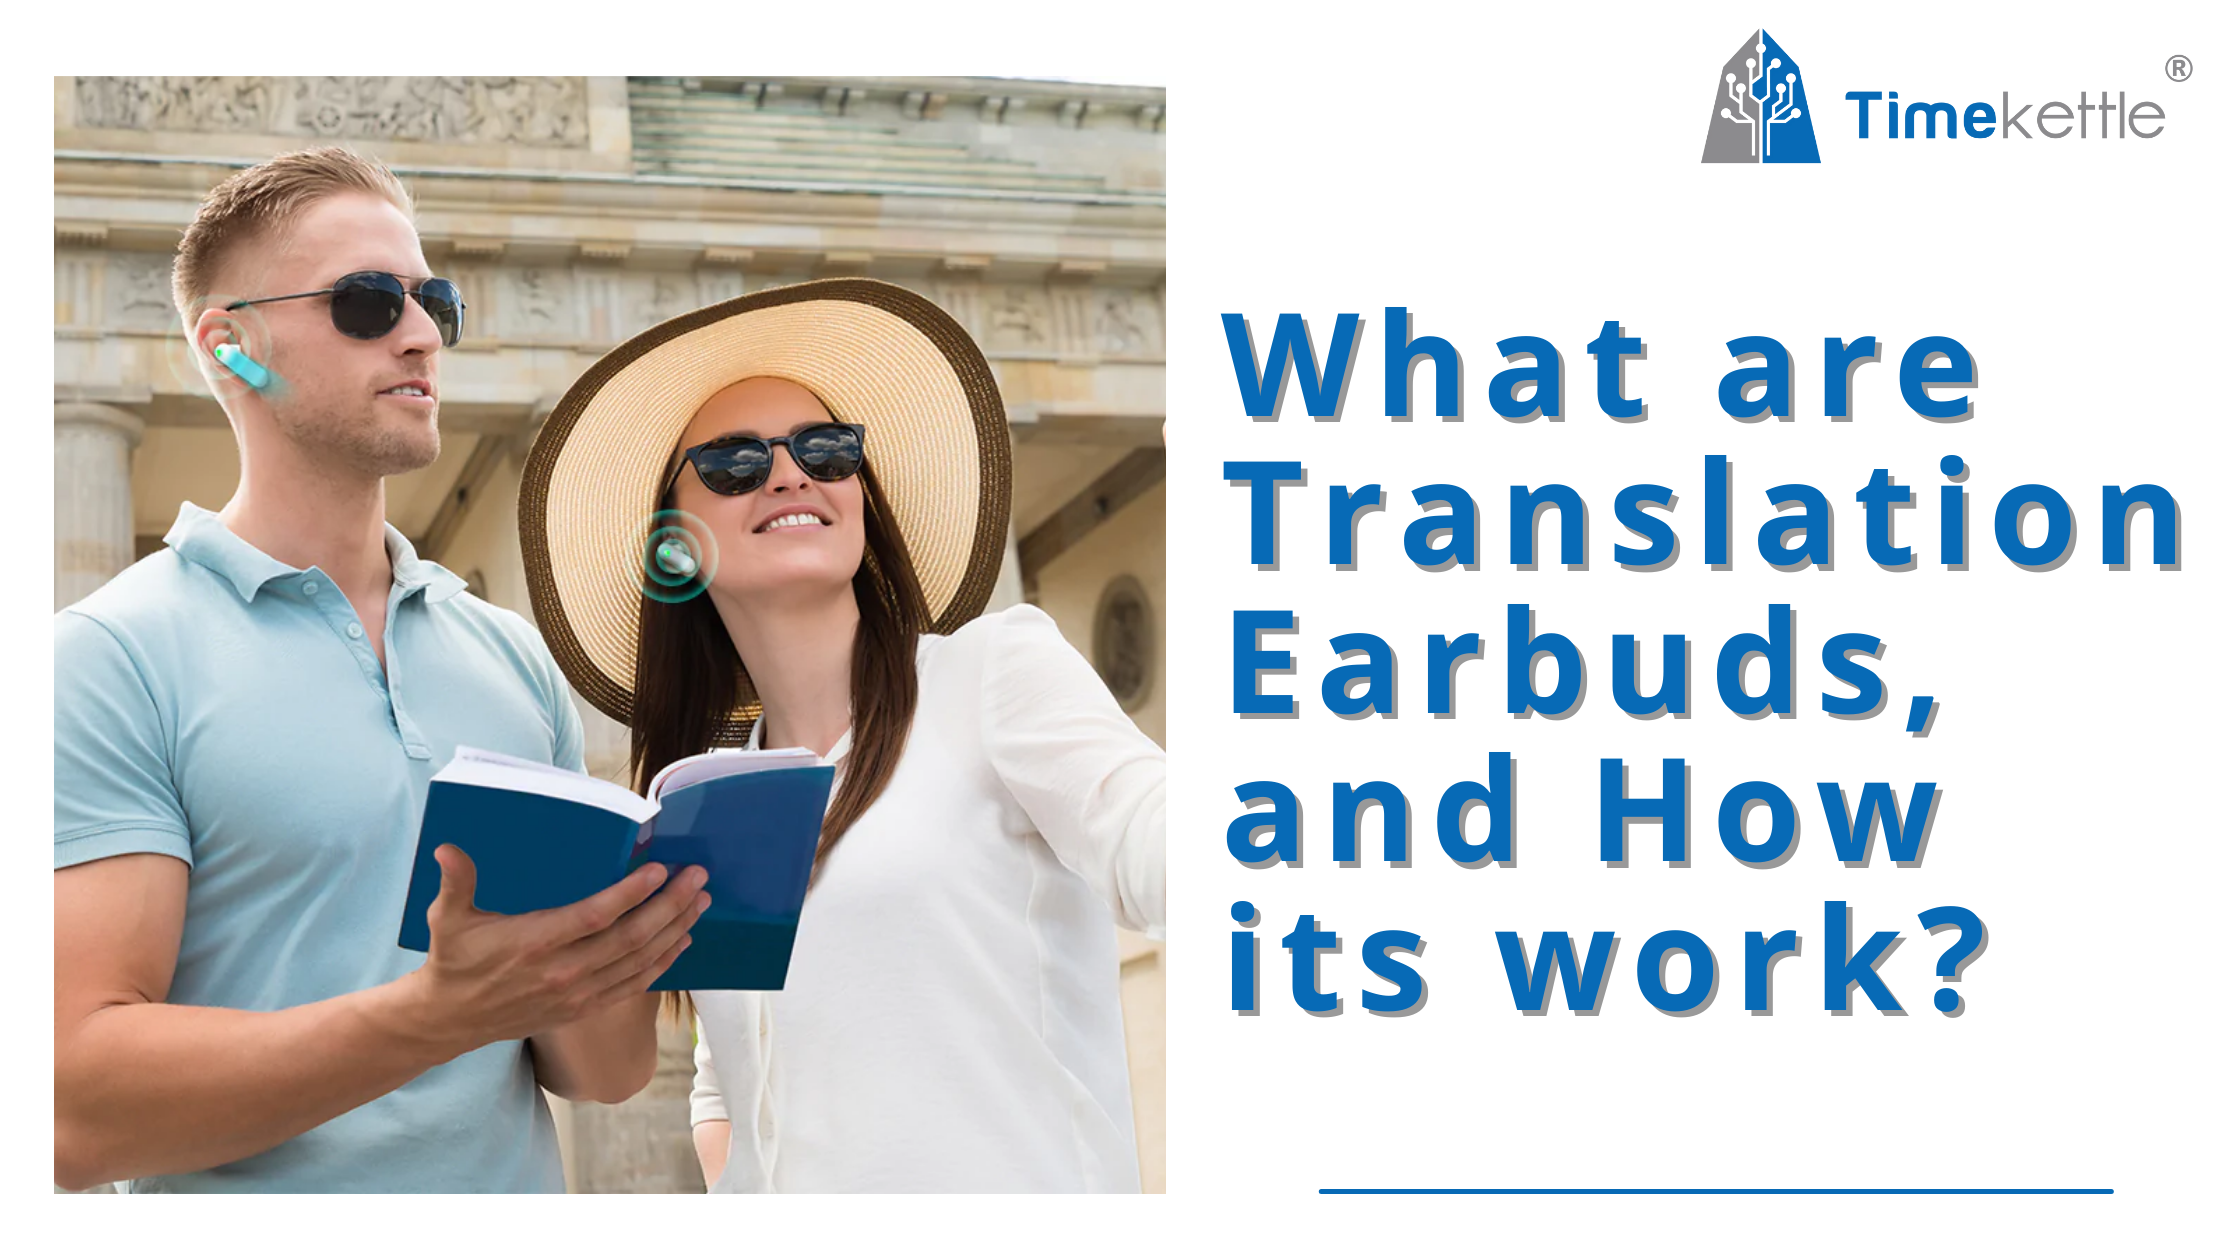 What Are Translation Earbuds, and How Its Work?